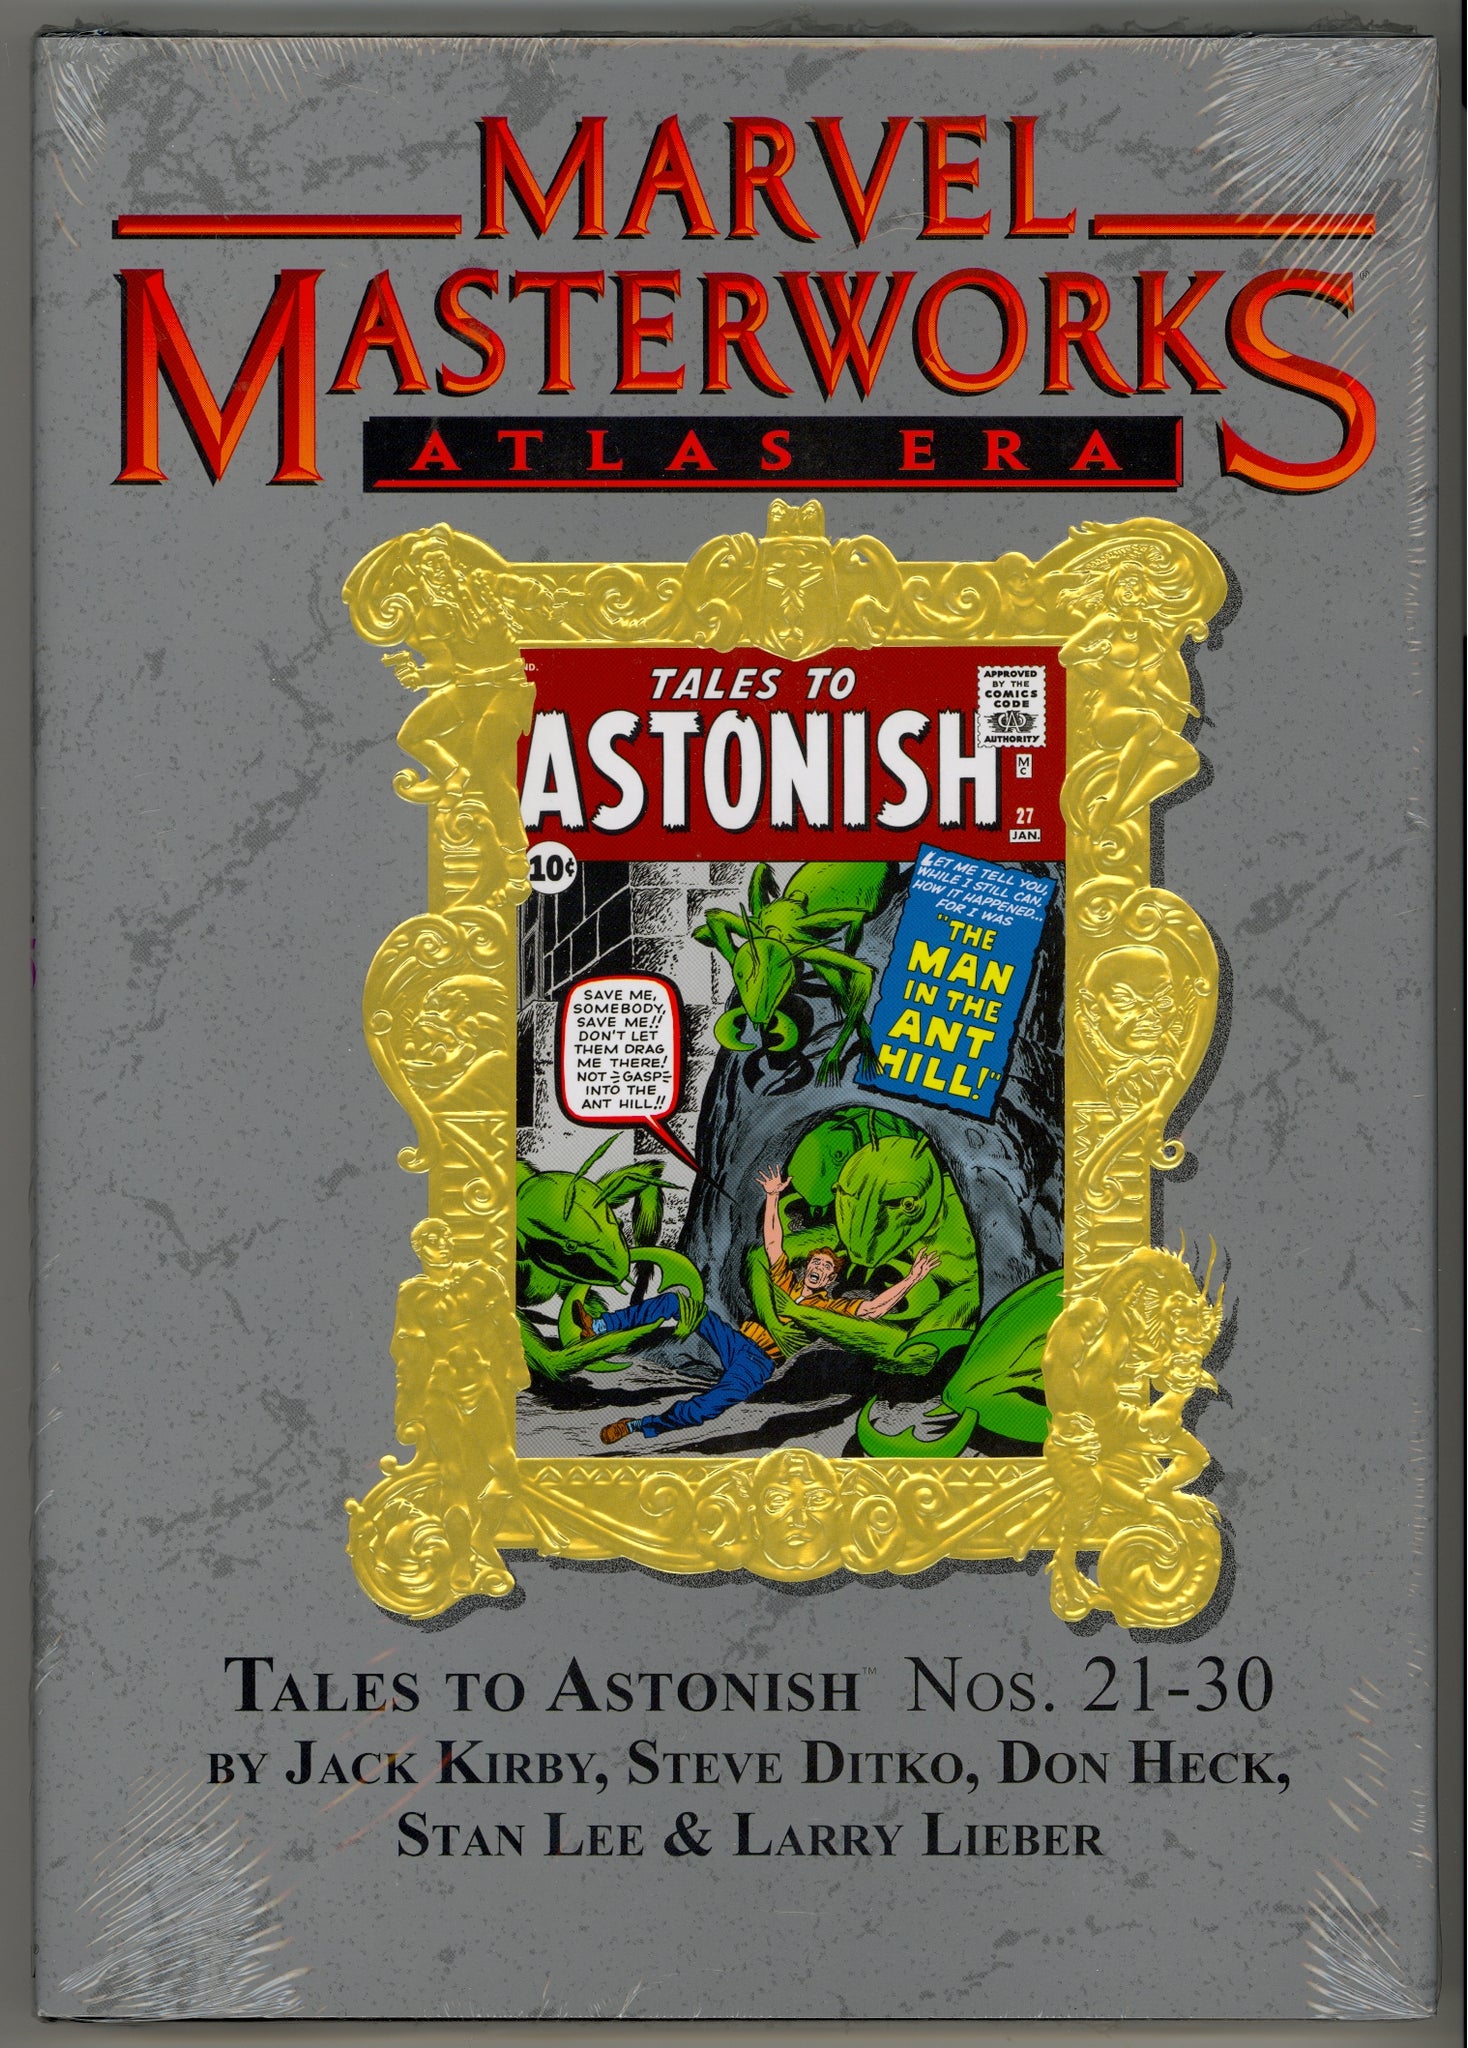 Marvel Masterworks - volume 135, Tales to Astonish #21-30, limited collectors edition